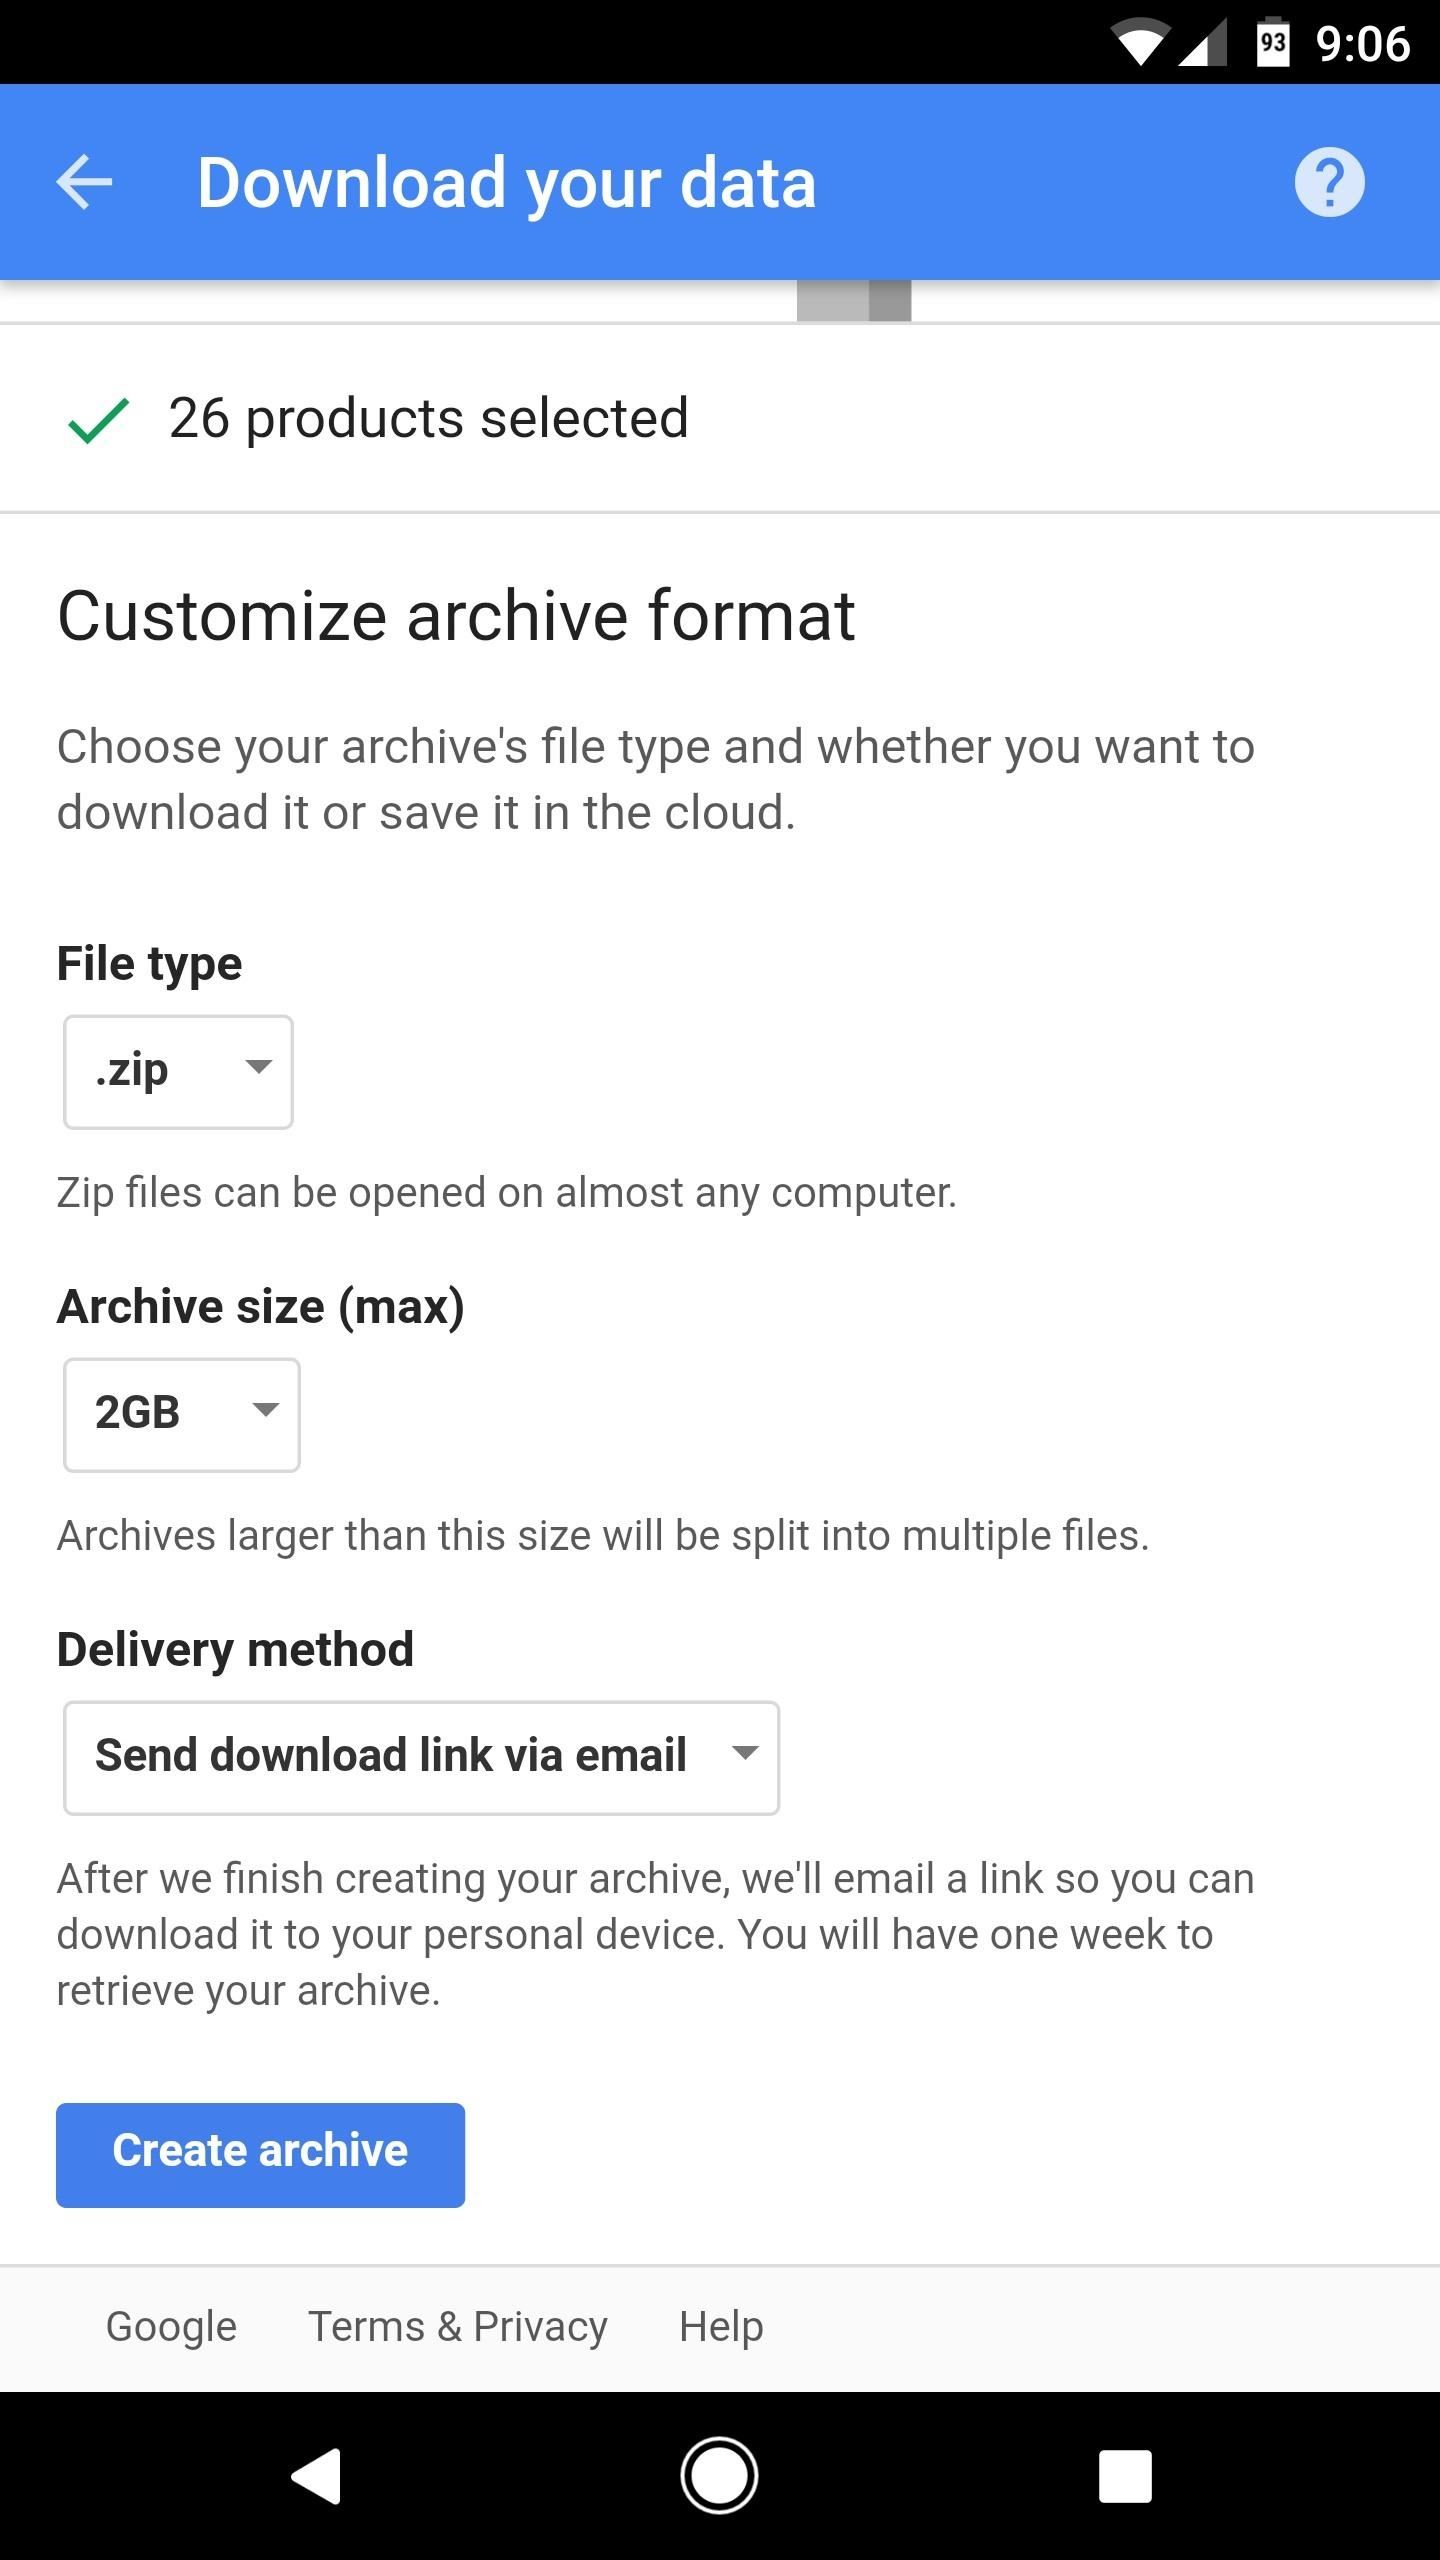 Download Backups of Emails, Photos, Videos & Other Account Data from Google